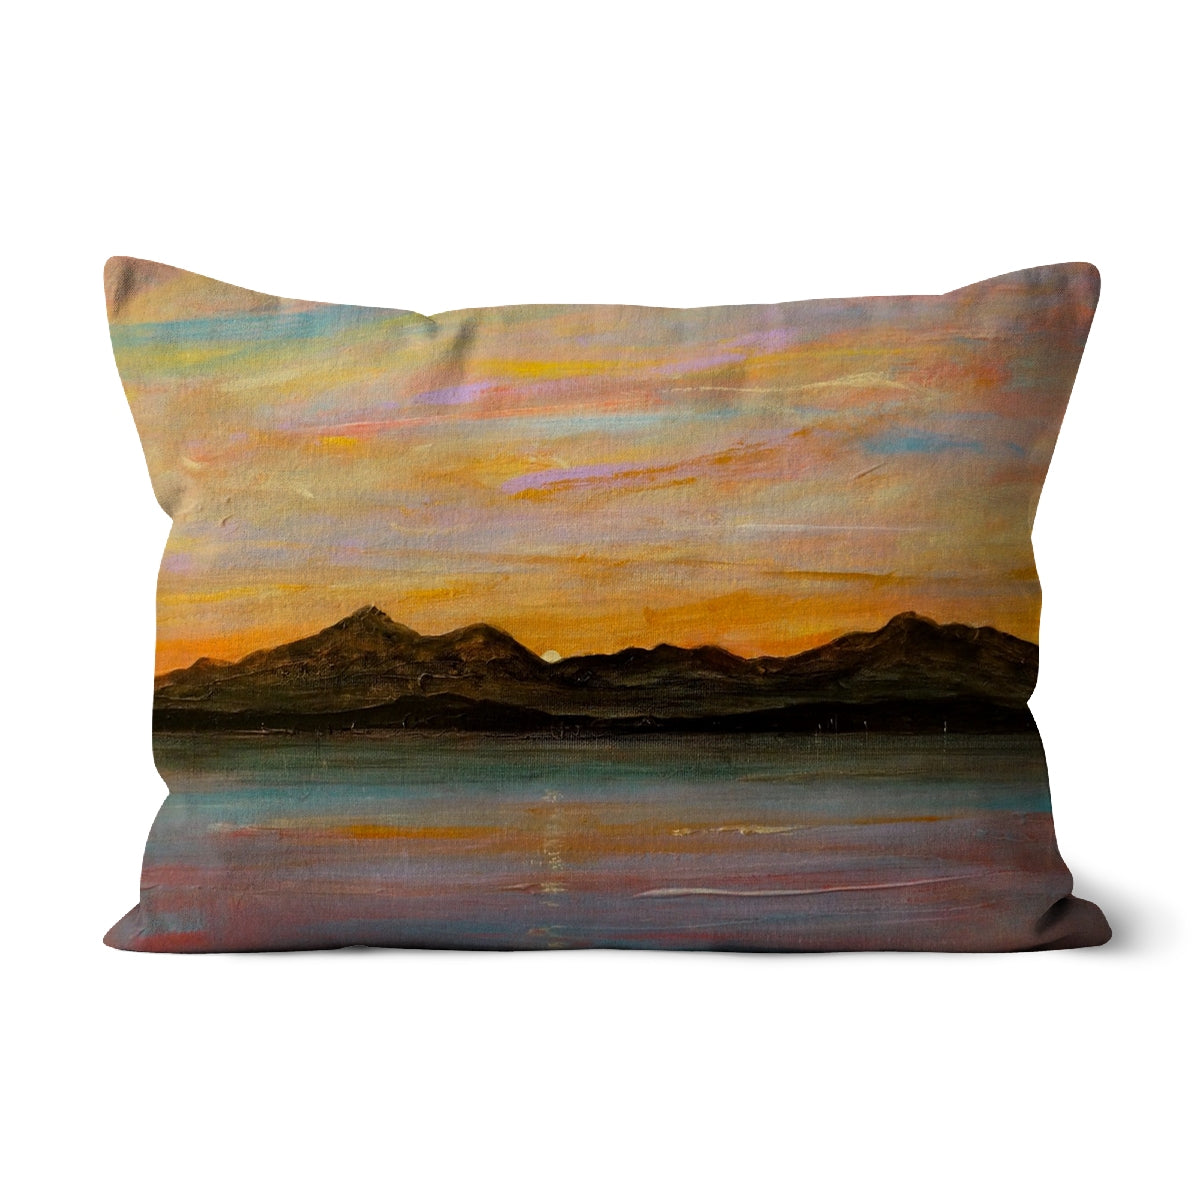 The Sleeping Warrior Arran Art Gifts Cushion-Cushions-Arran Art Gallery-Canvas-19"x13"-Paintings, Prints, Homeware, Art Gifts From Scotland By Scottish Artist Kevin Hunter